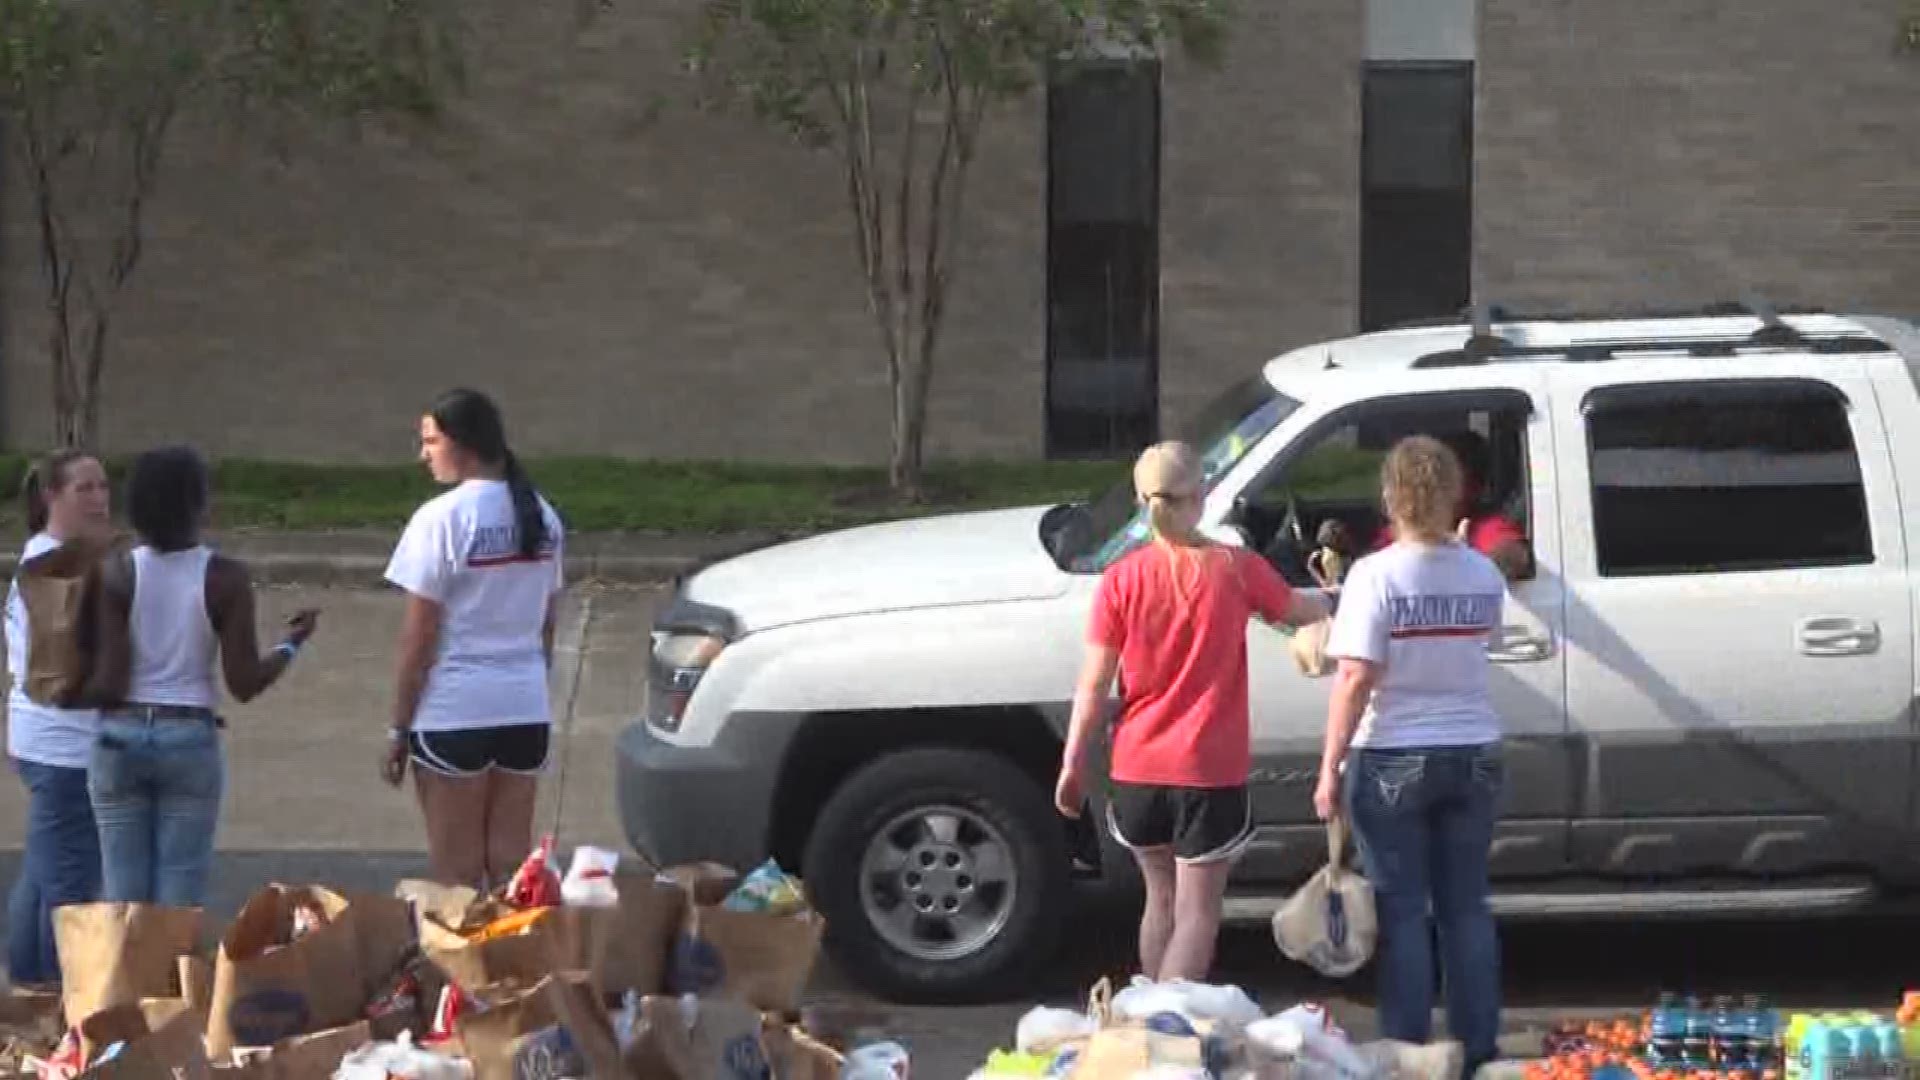 Cathedral Church in Beaumont collected water and supplies for Harvey victims in Southeast Texas